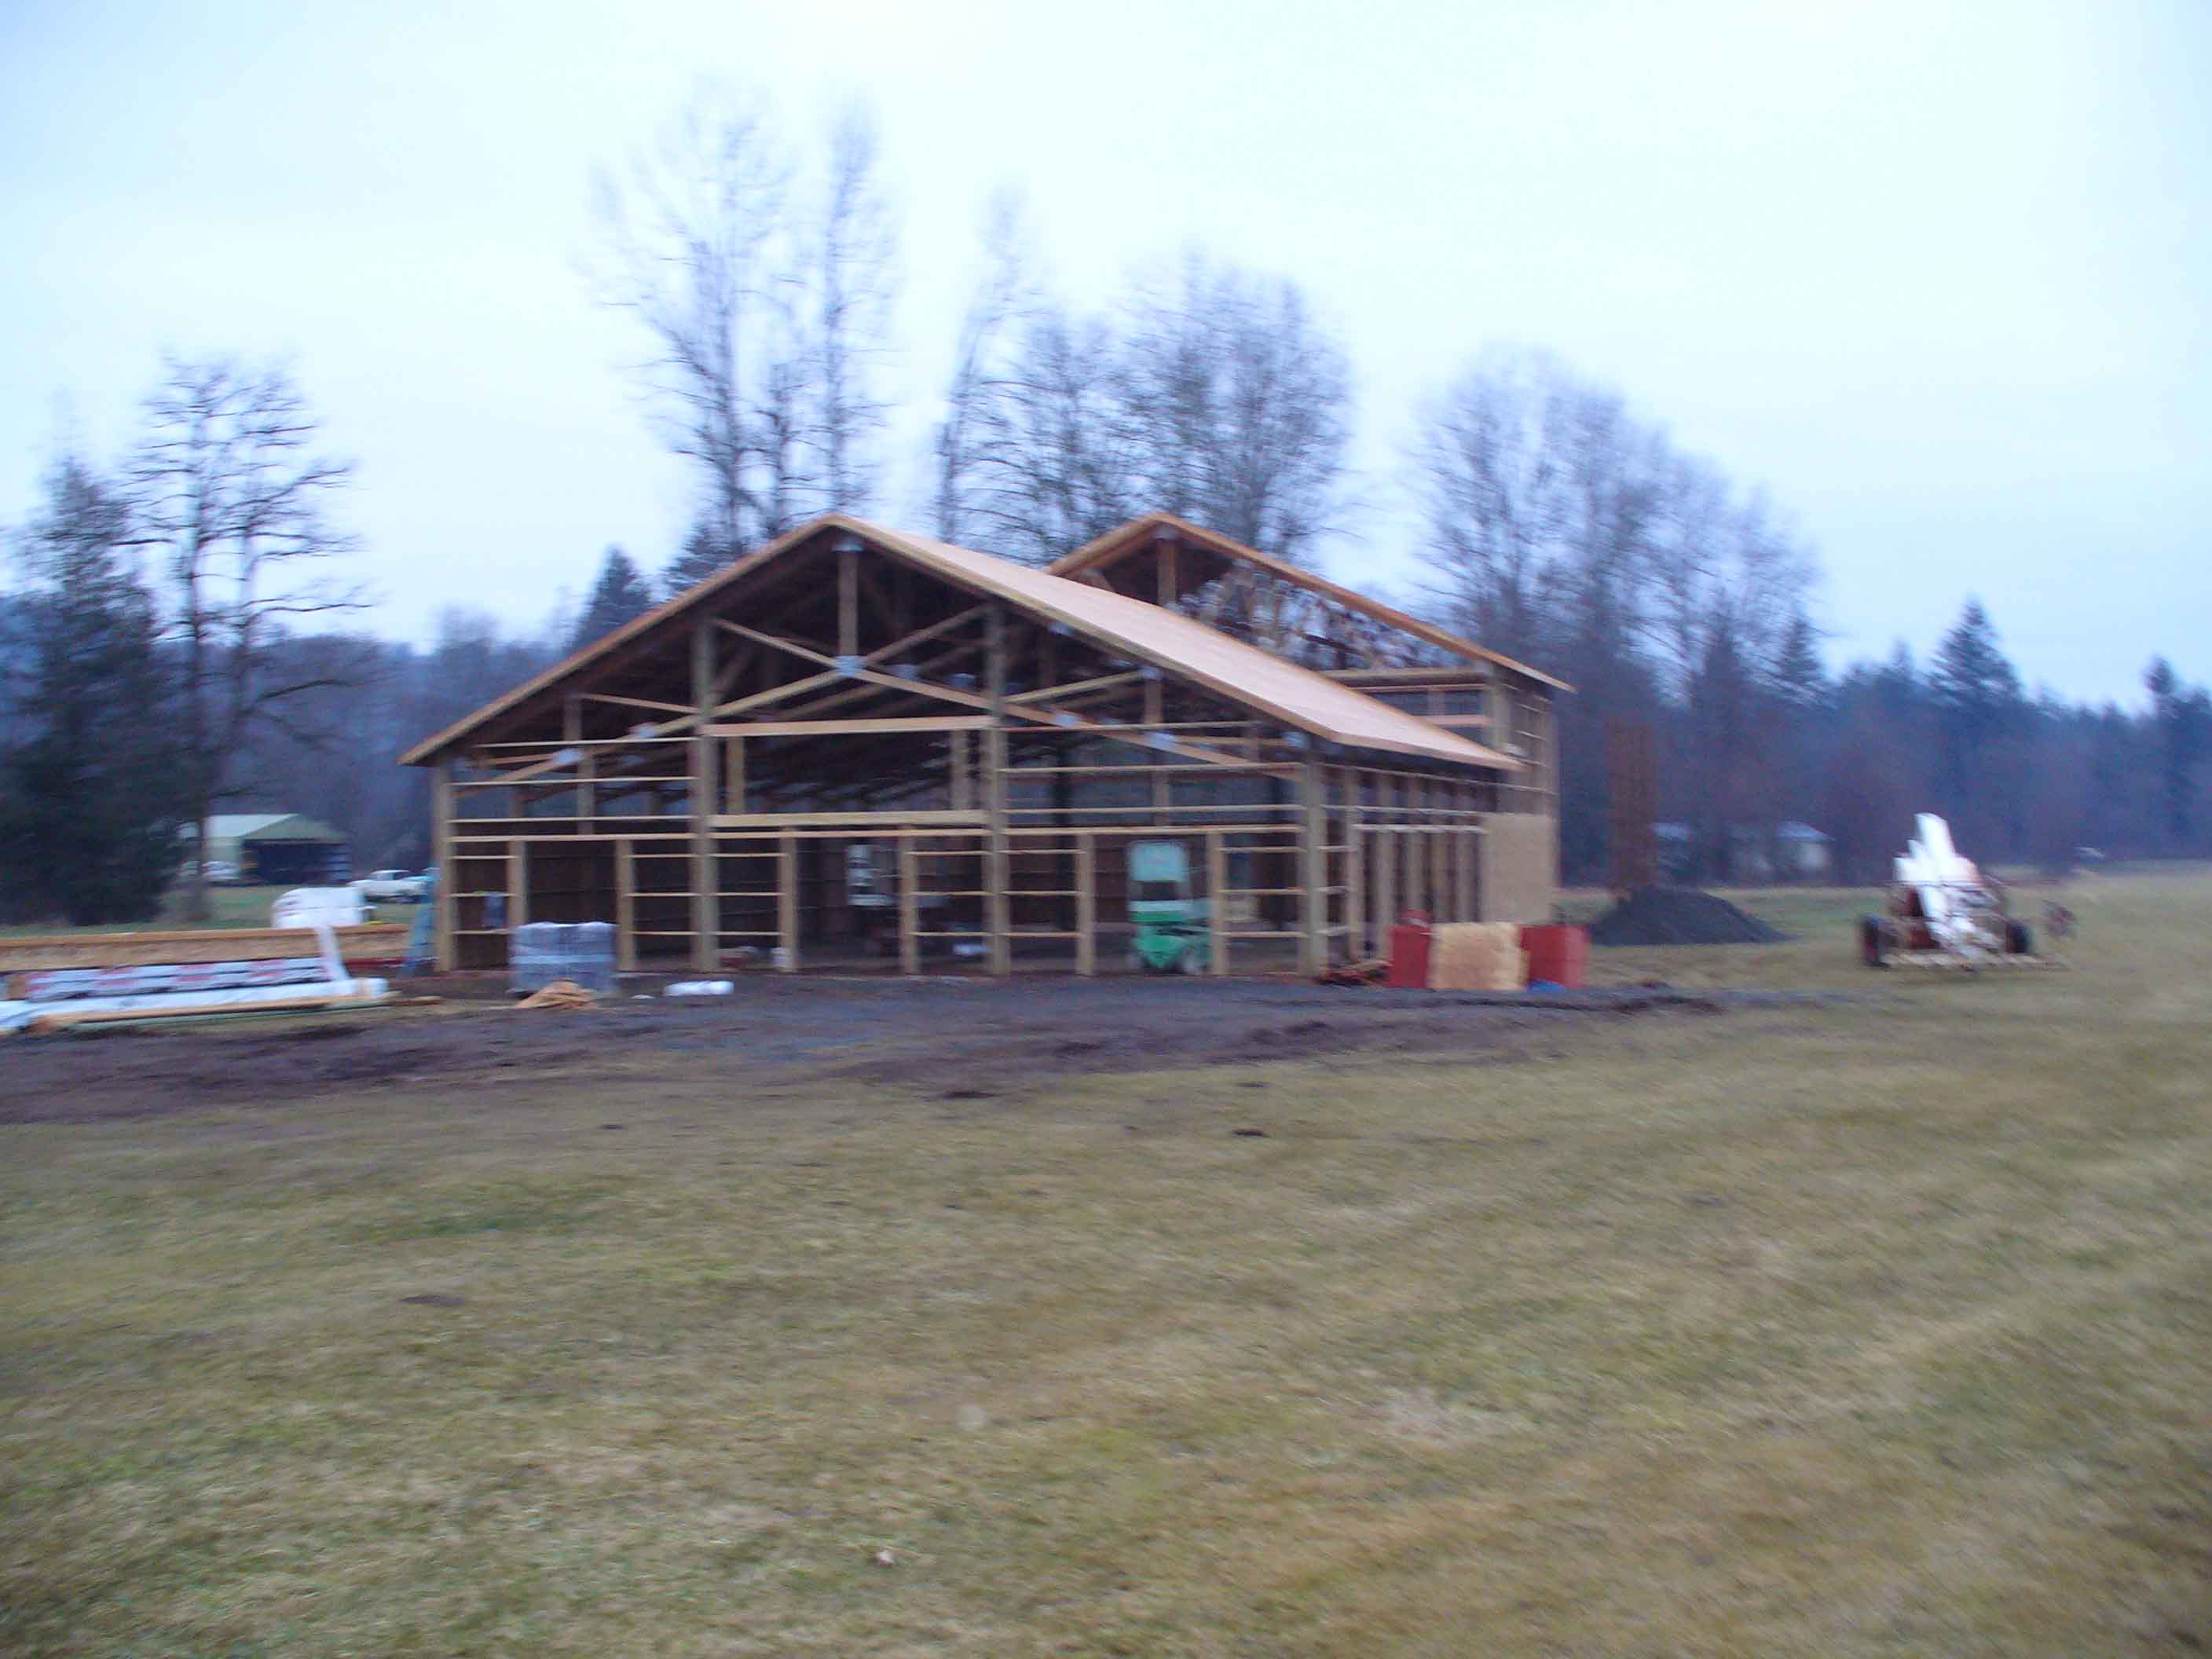 Framed pole building with 1200' living space and large meeting space on private airport